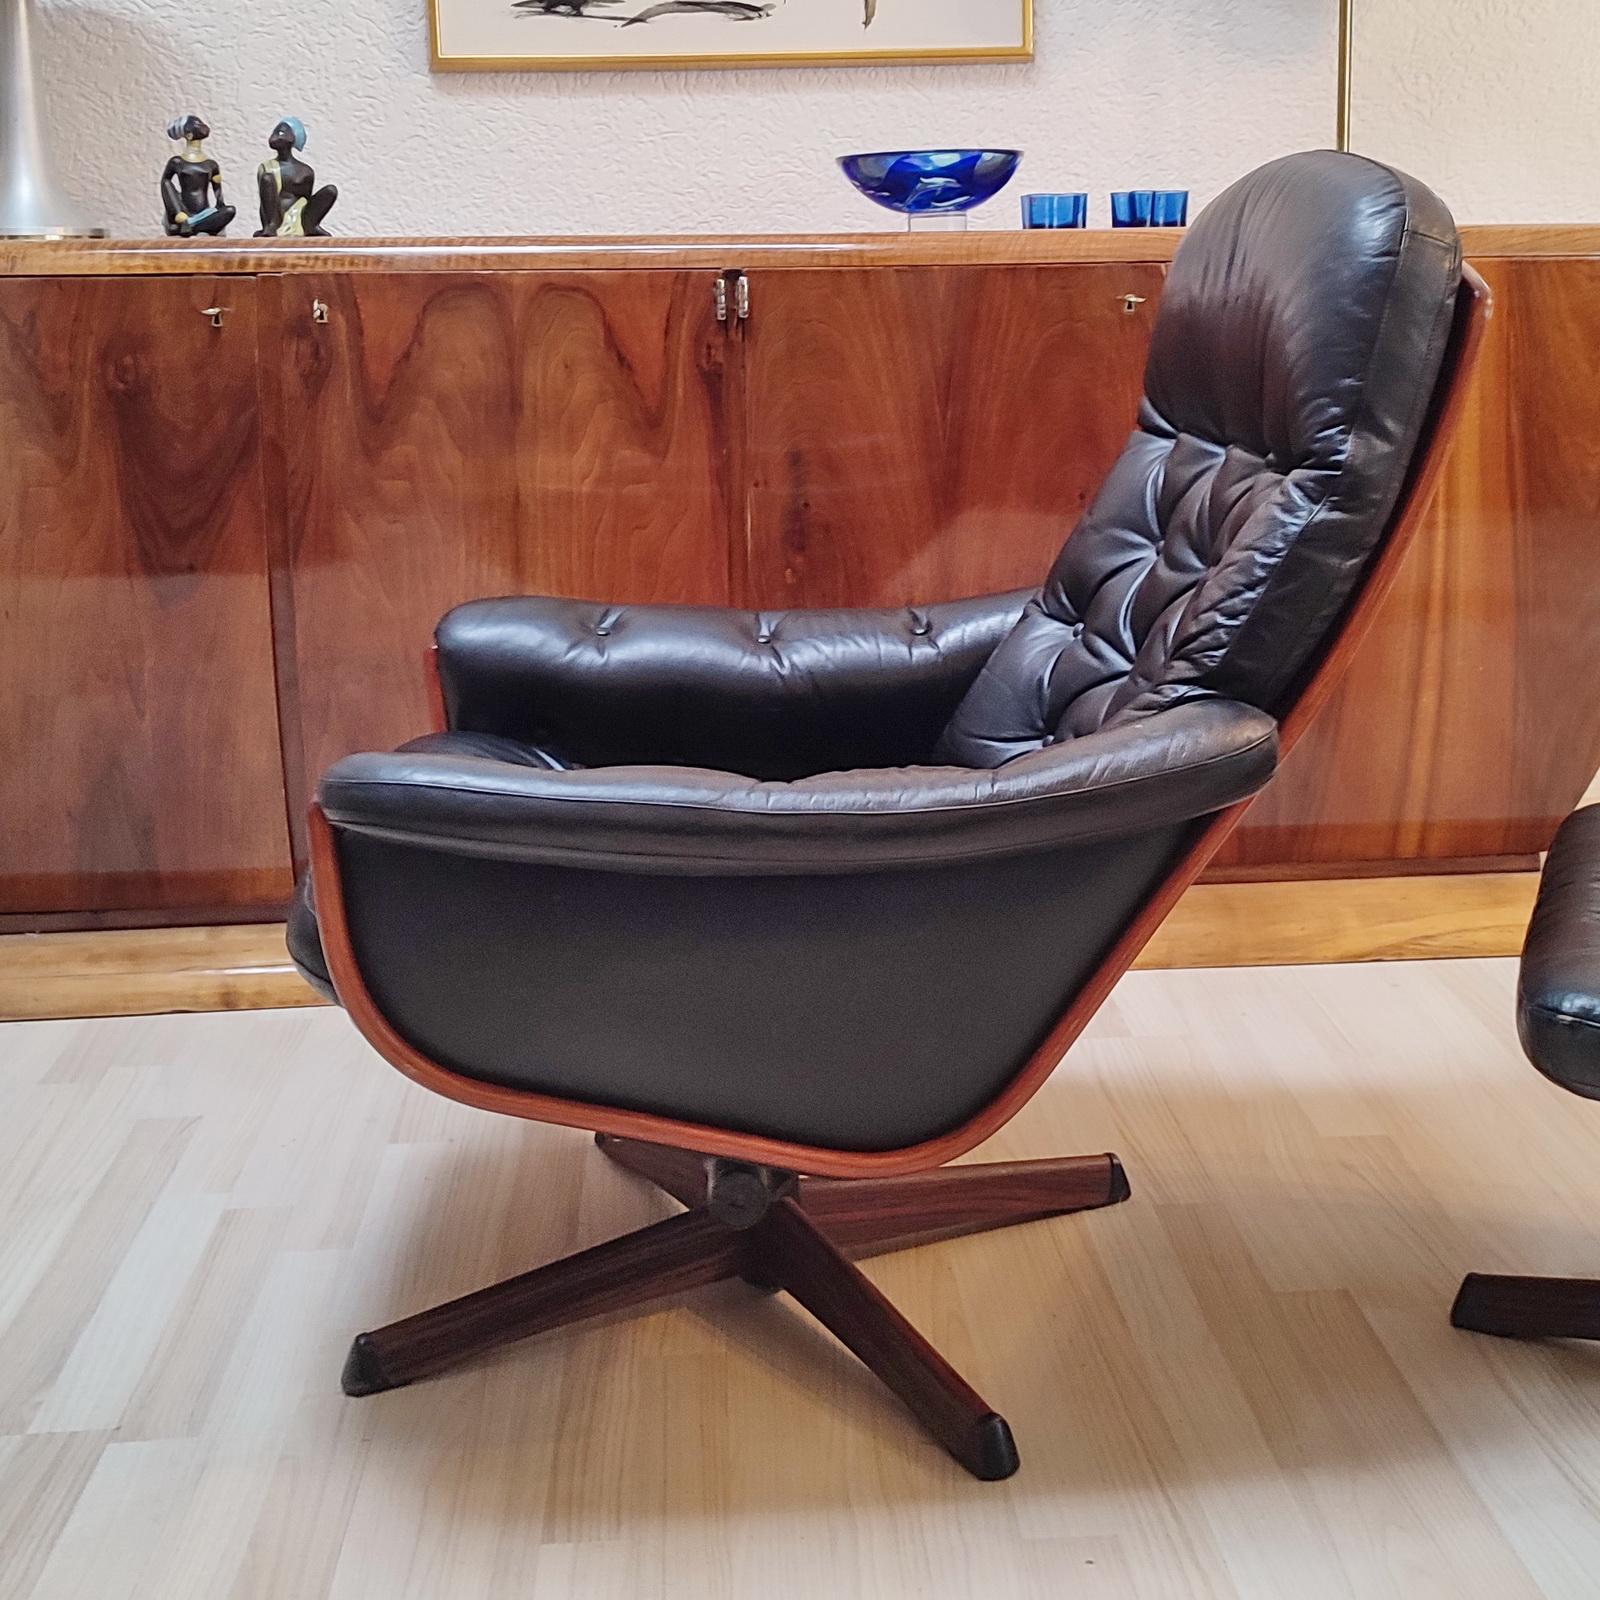 Metal Vintage Lounge Swivel Chairs with Footrest by Göte Möbel, Sweden 1970s For Sale